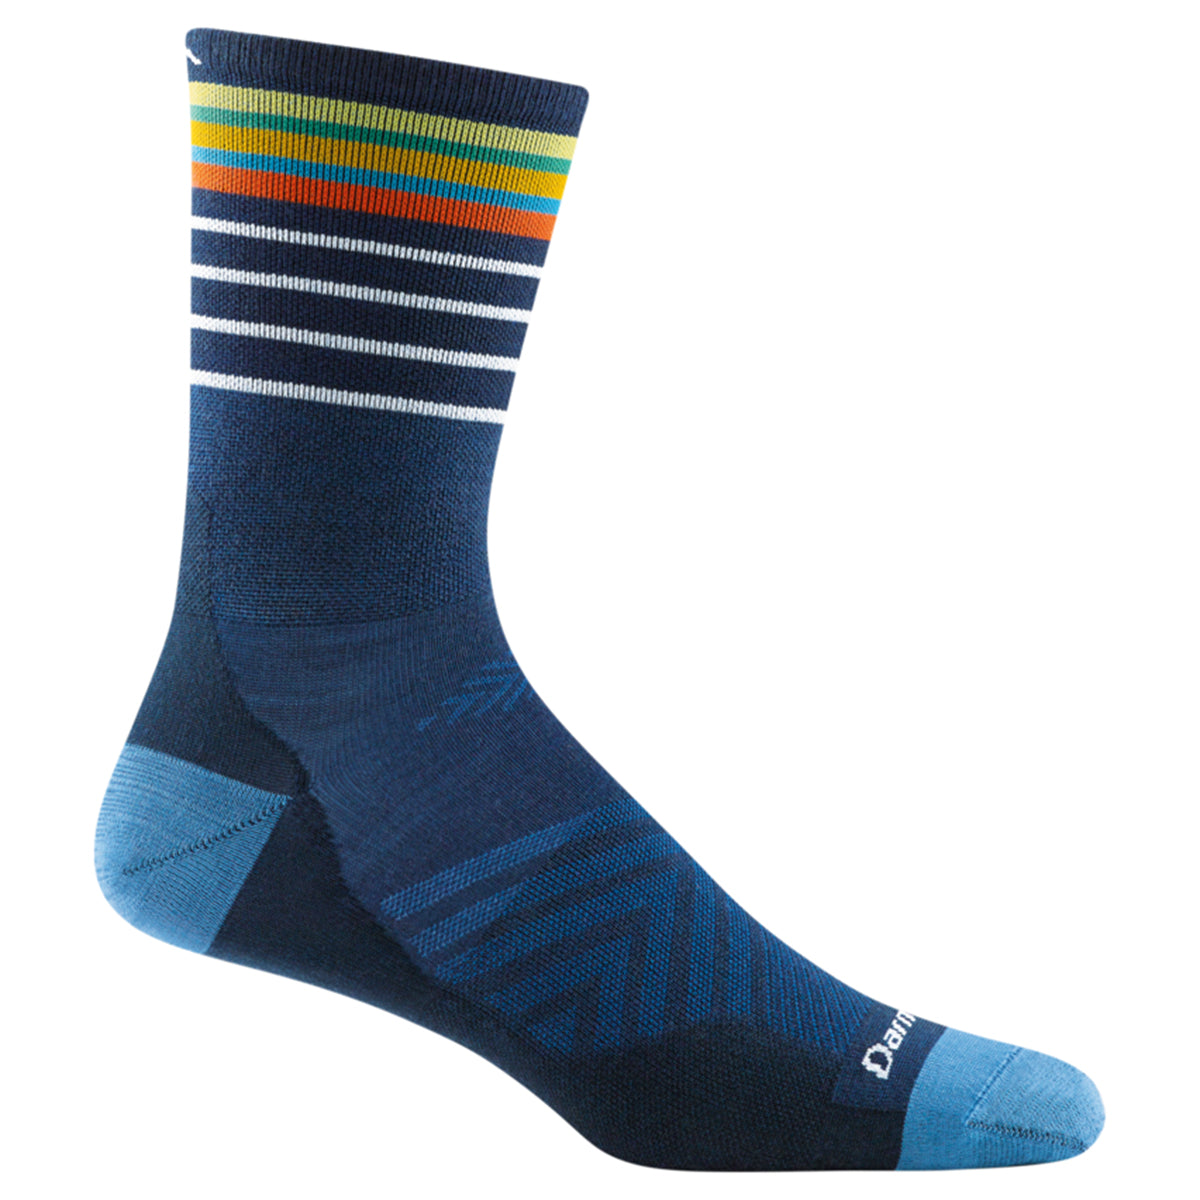 A single blue athletic Darn Tough Run Stride Micro Crew Ultra Lightweight sock with a colorful striped pattern at the top, designed to cover up to the lower calf.